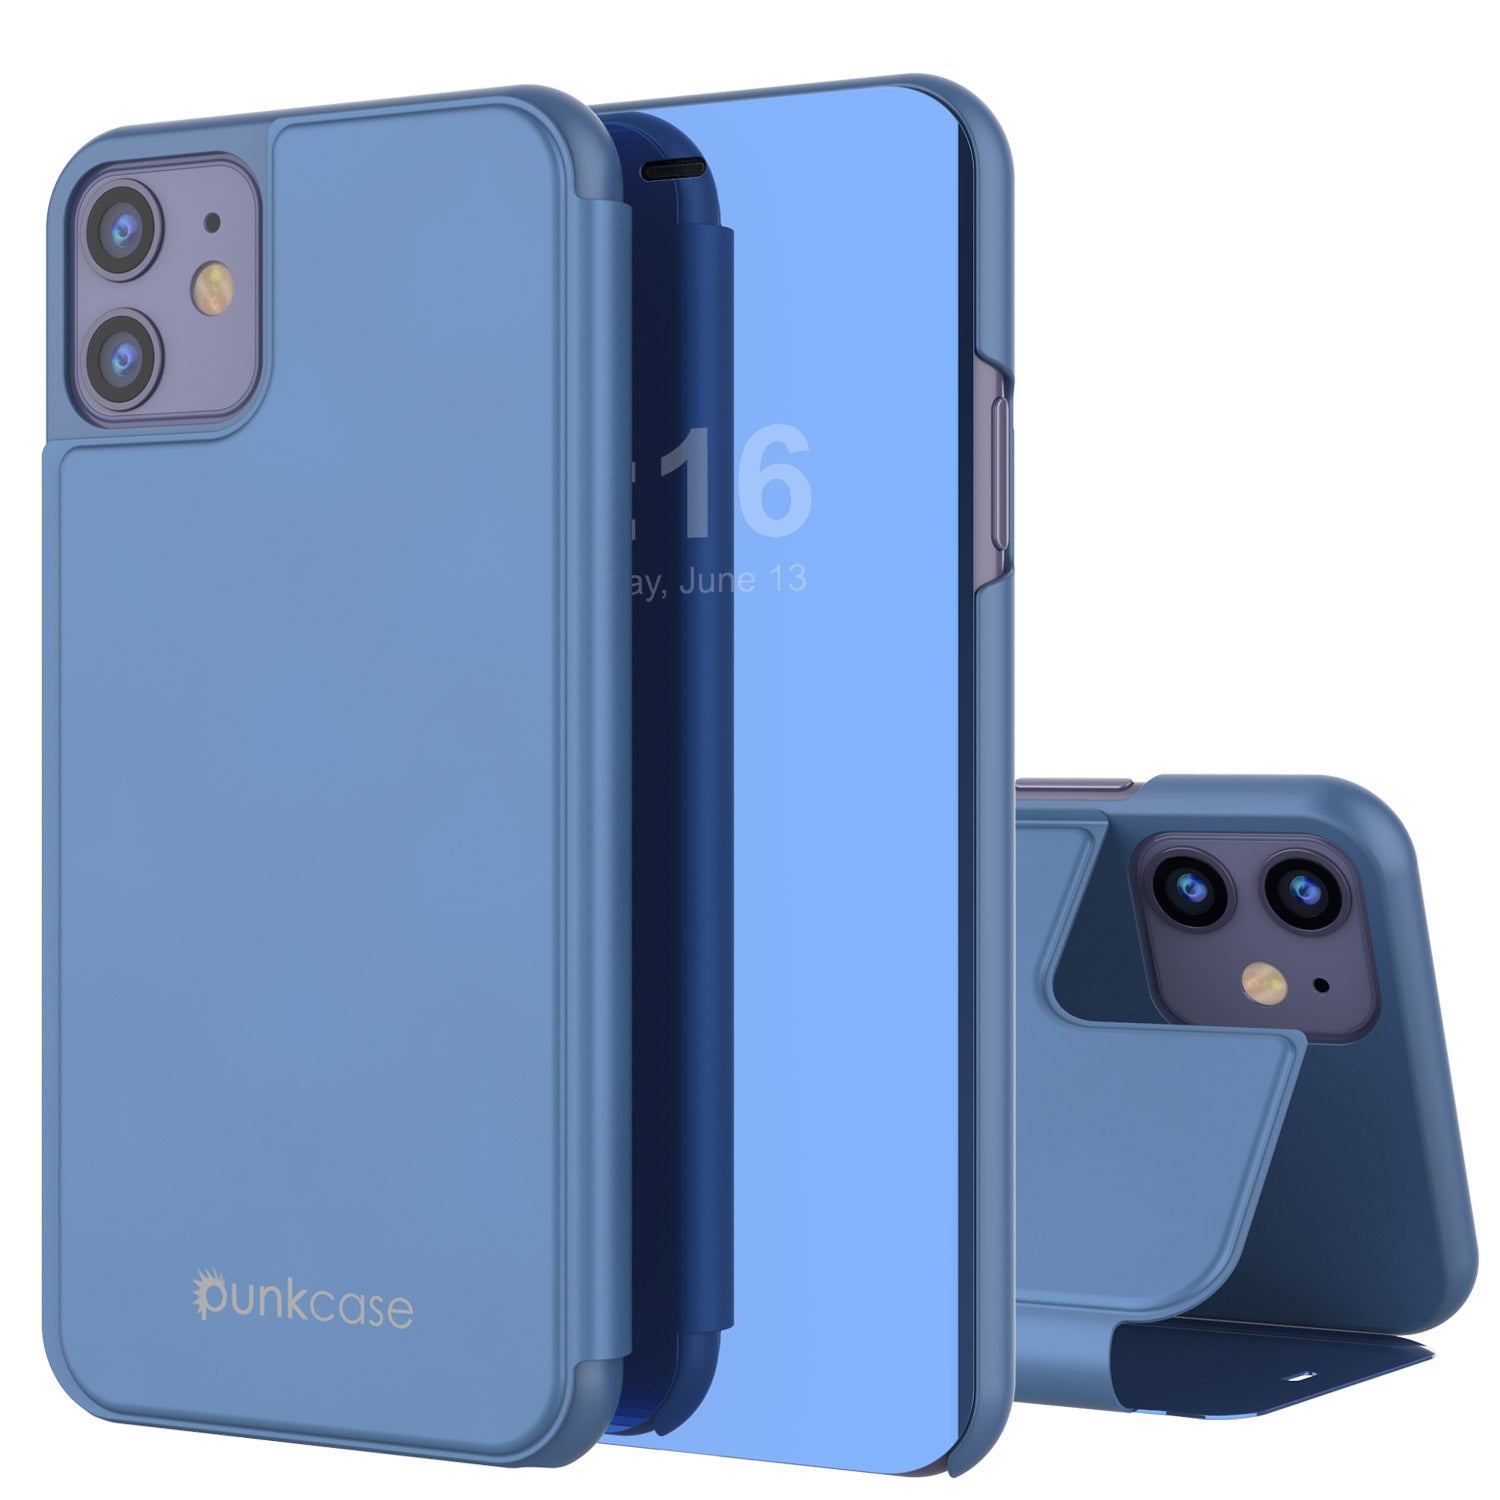 Punkcase iPhone 11 / XI Reflector Case Protective Flip Cover [Blue]